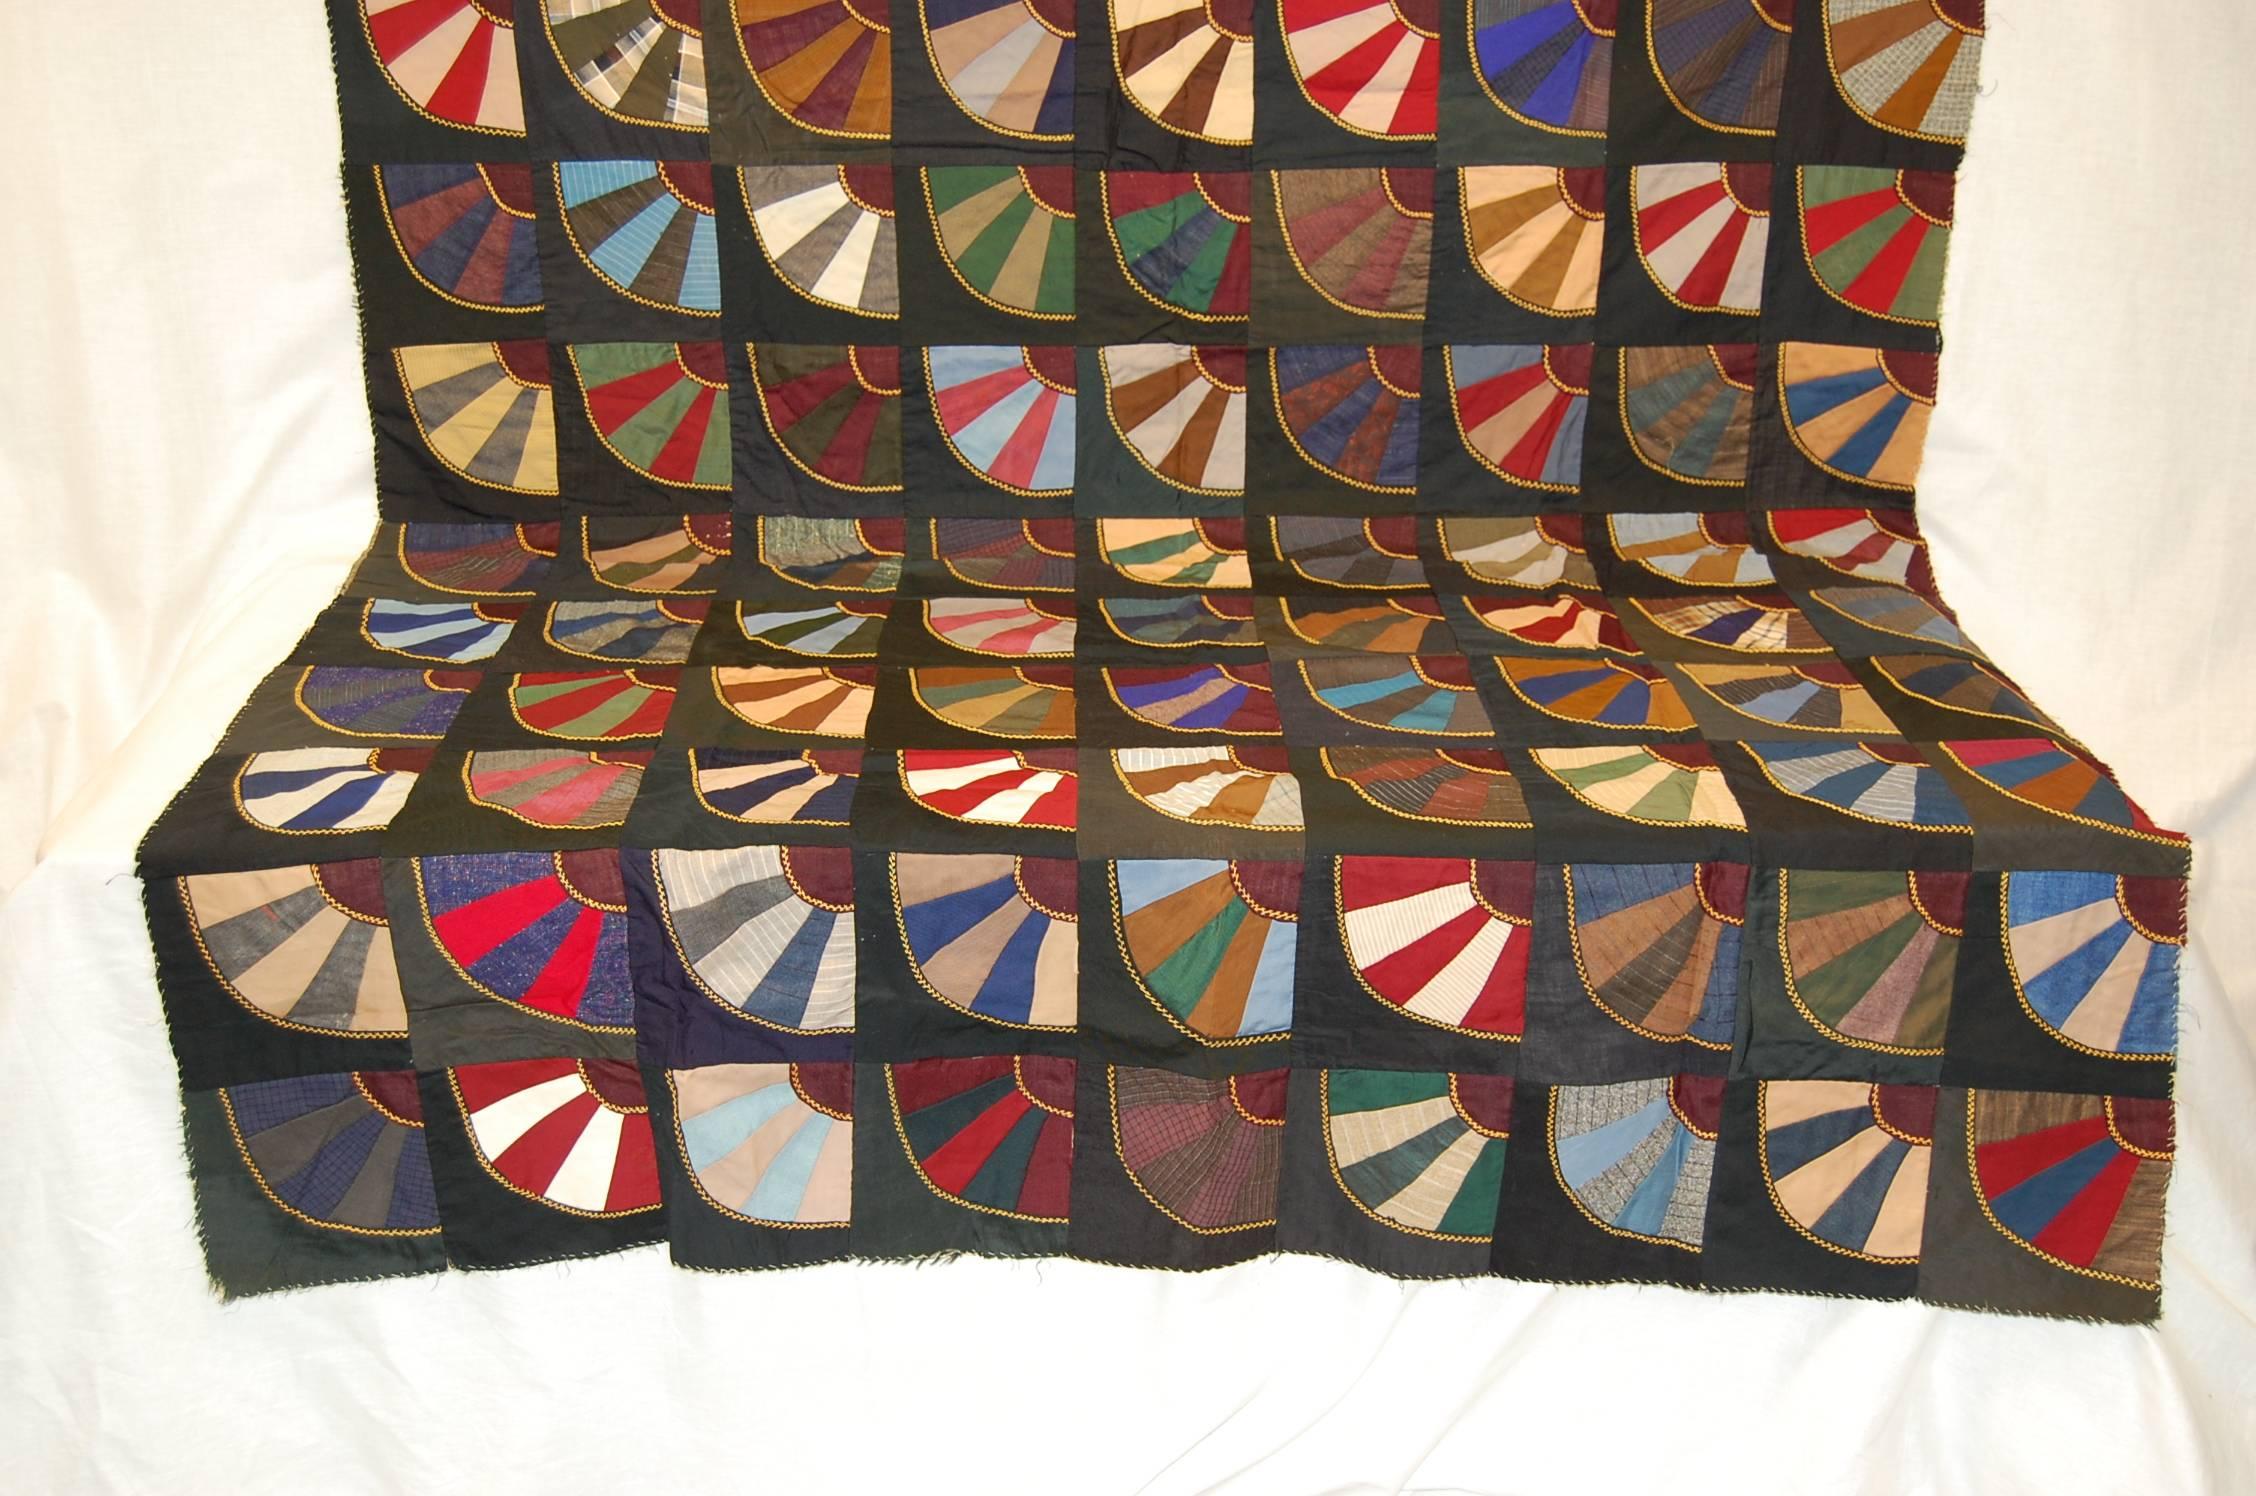 Hand-Crafted American Cotton Quilt, circa 1900